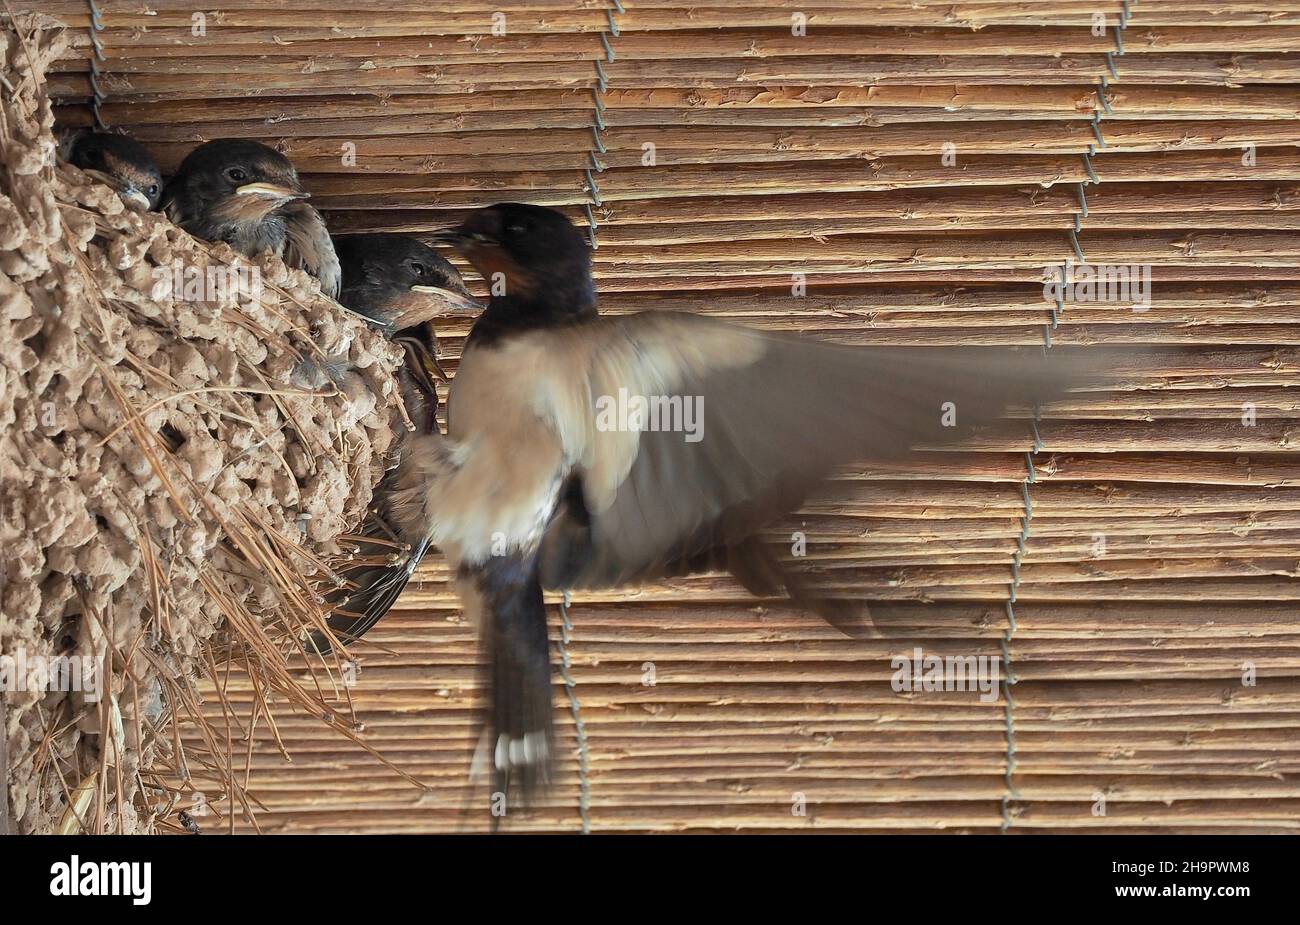 Mother swallow in flight feeding her young in the nest, feeding the young swallows under the roof, Spain Stock Photo